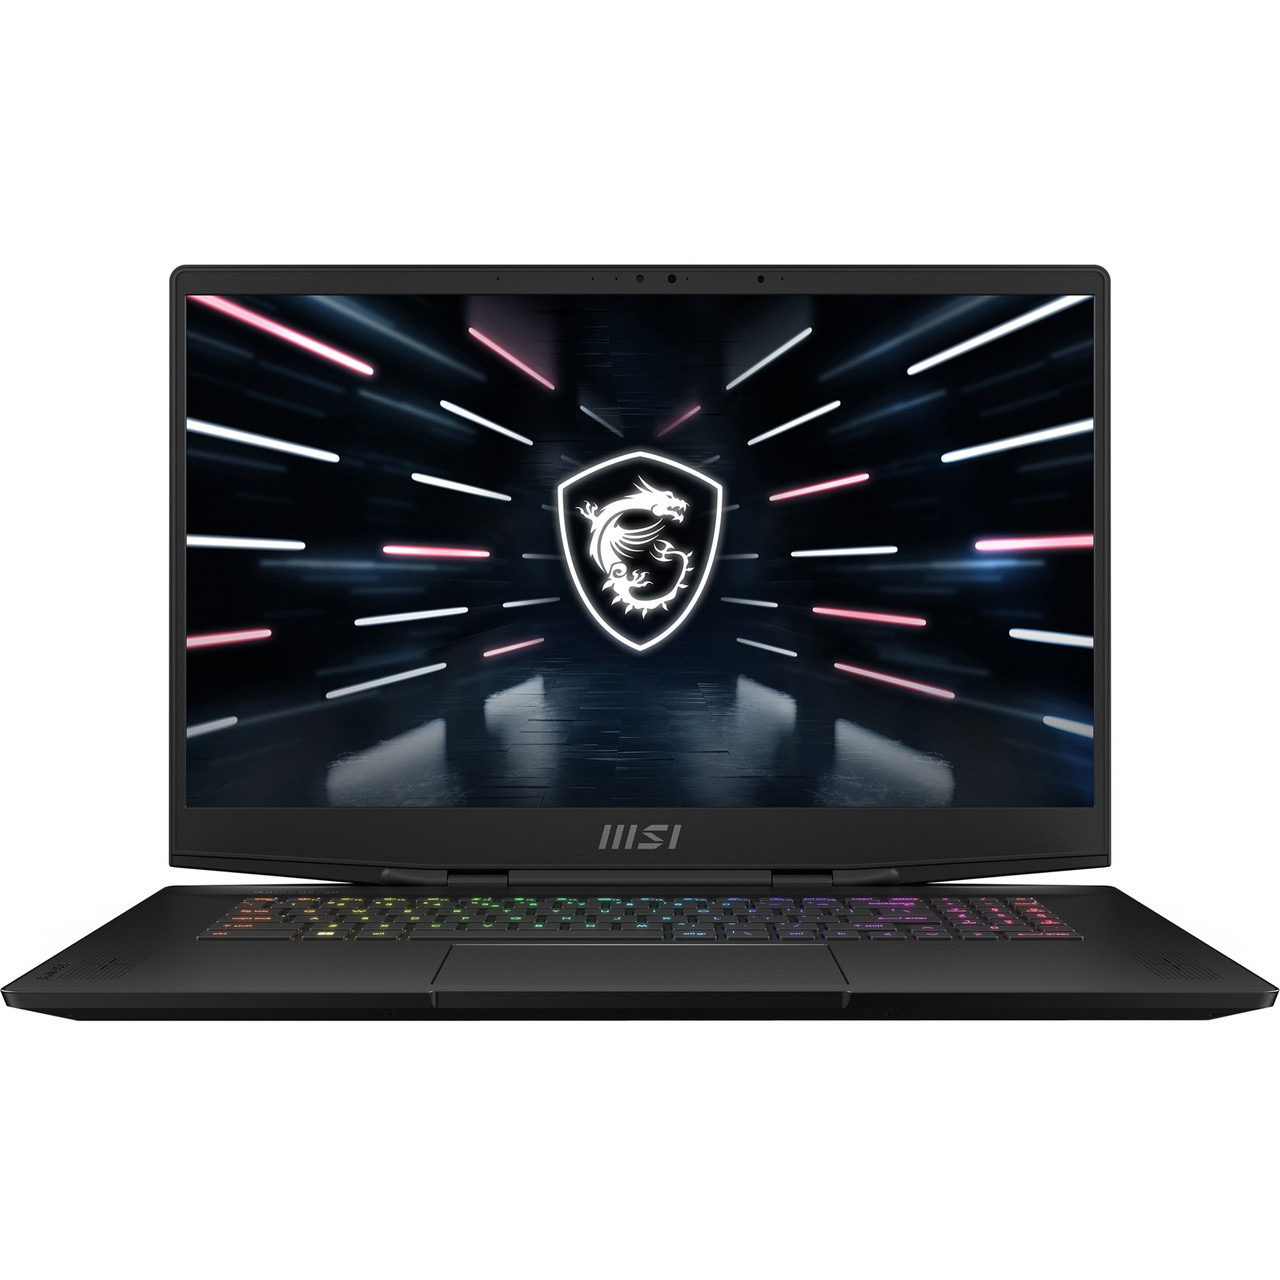 MSI Stealth GS77 Stealth GS77 12UGS-041 17.3" Gaming Notebook - QHD - 2560 x 1440 - Intel Core i7 12th Gen i7-12700H Tetradeca-core (14 Core) 1.70 GHz - 32 GB Total RAM - 1 TB SSD - Core Black